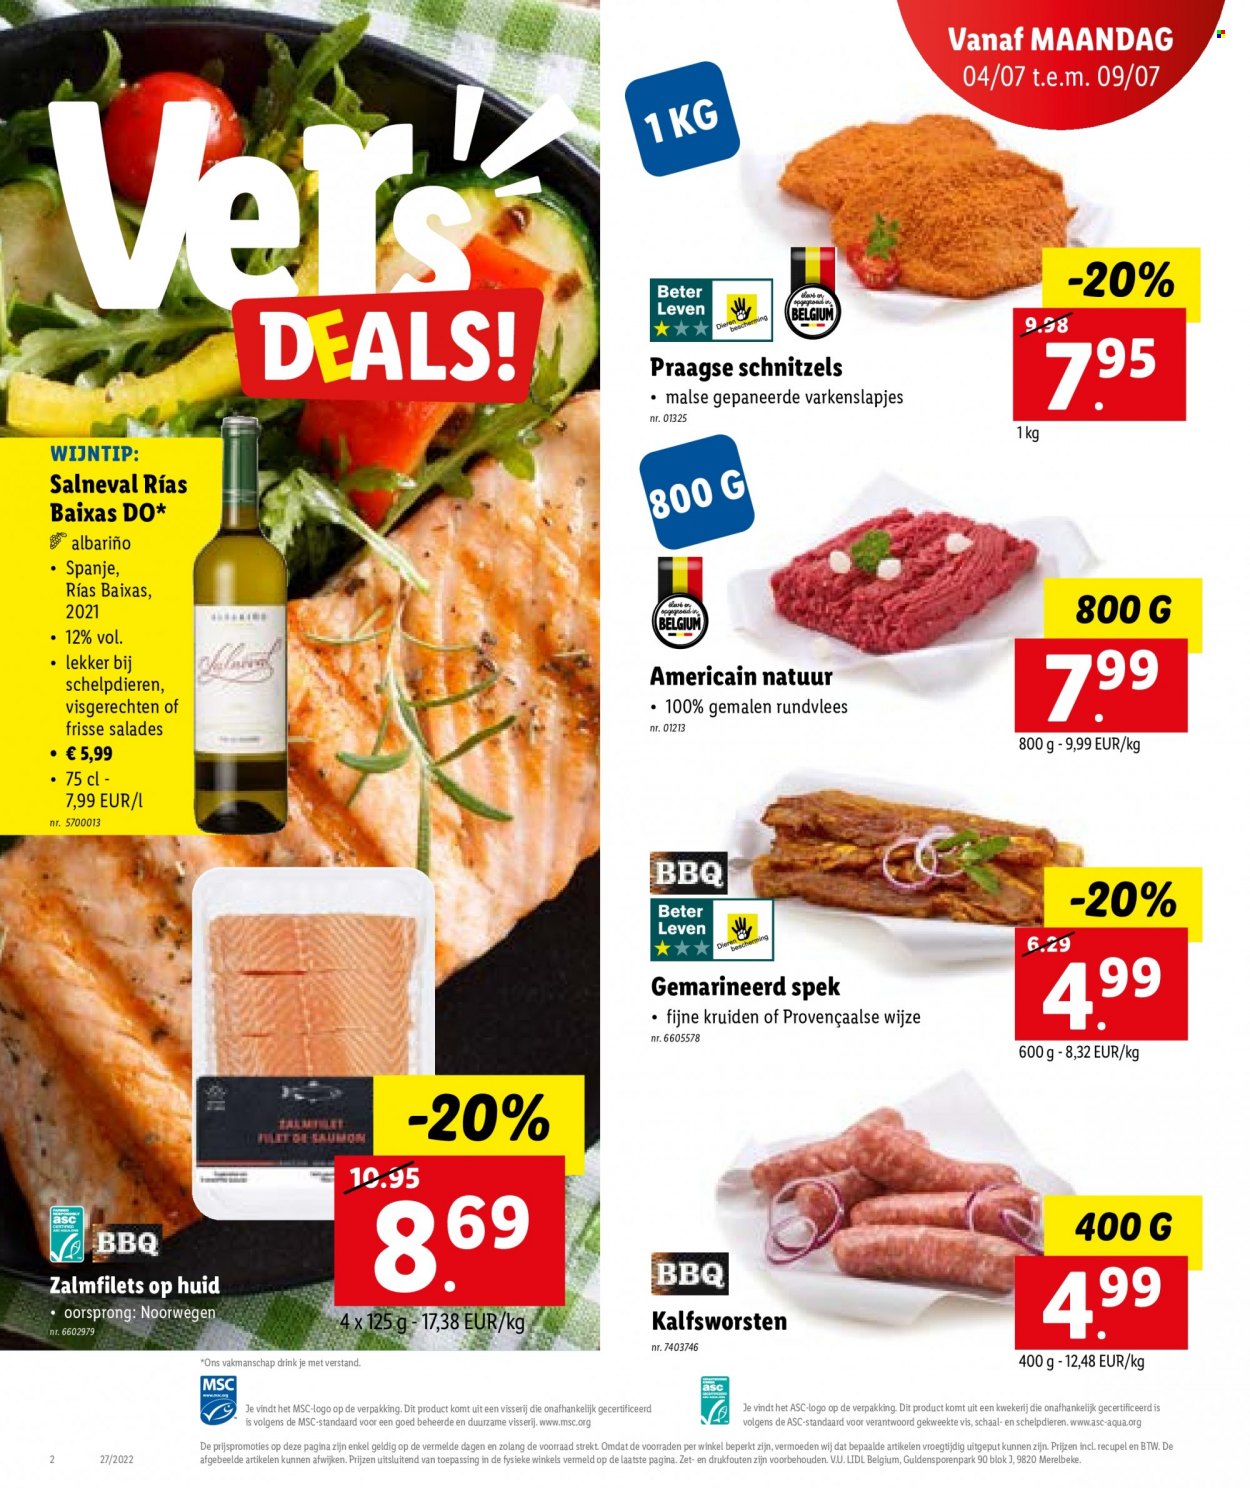 Catalogue Lidl - 4.7.2022 - 9.7.2022. Page 2.